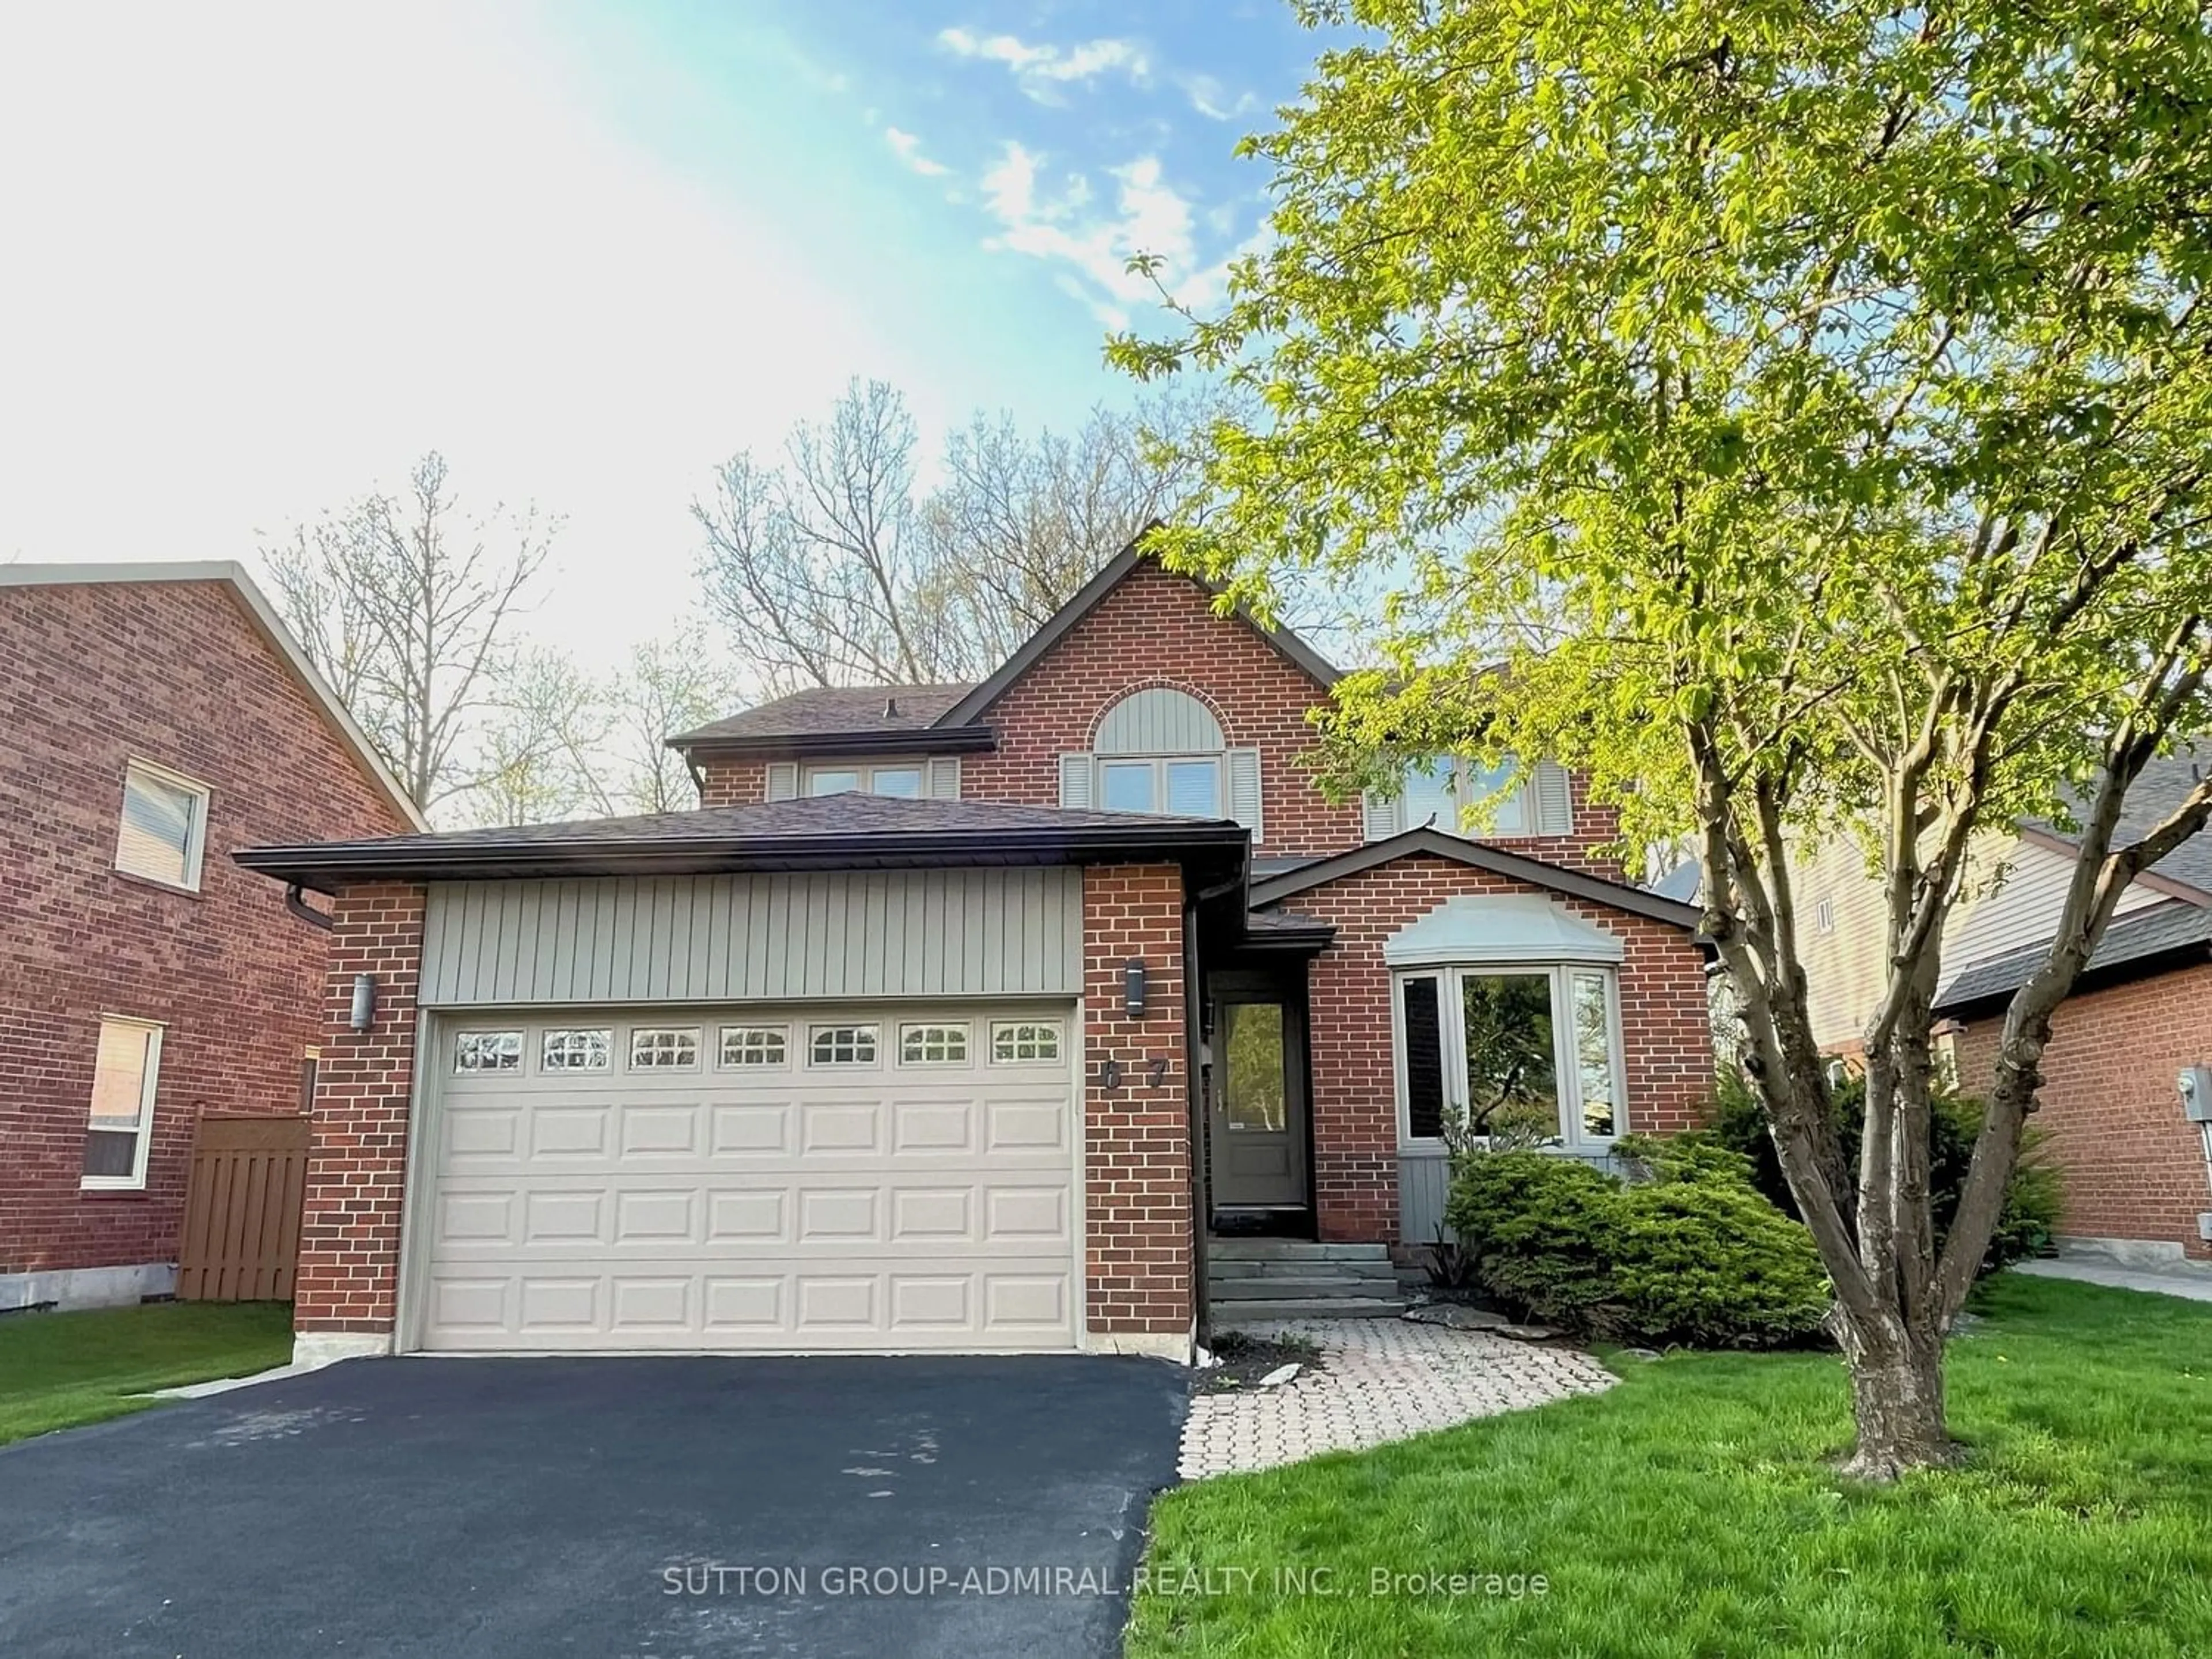 Home with brick exterior material for 67 Torrance Wood, Brampton Ontario L6Y 2X4